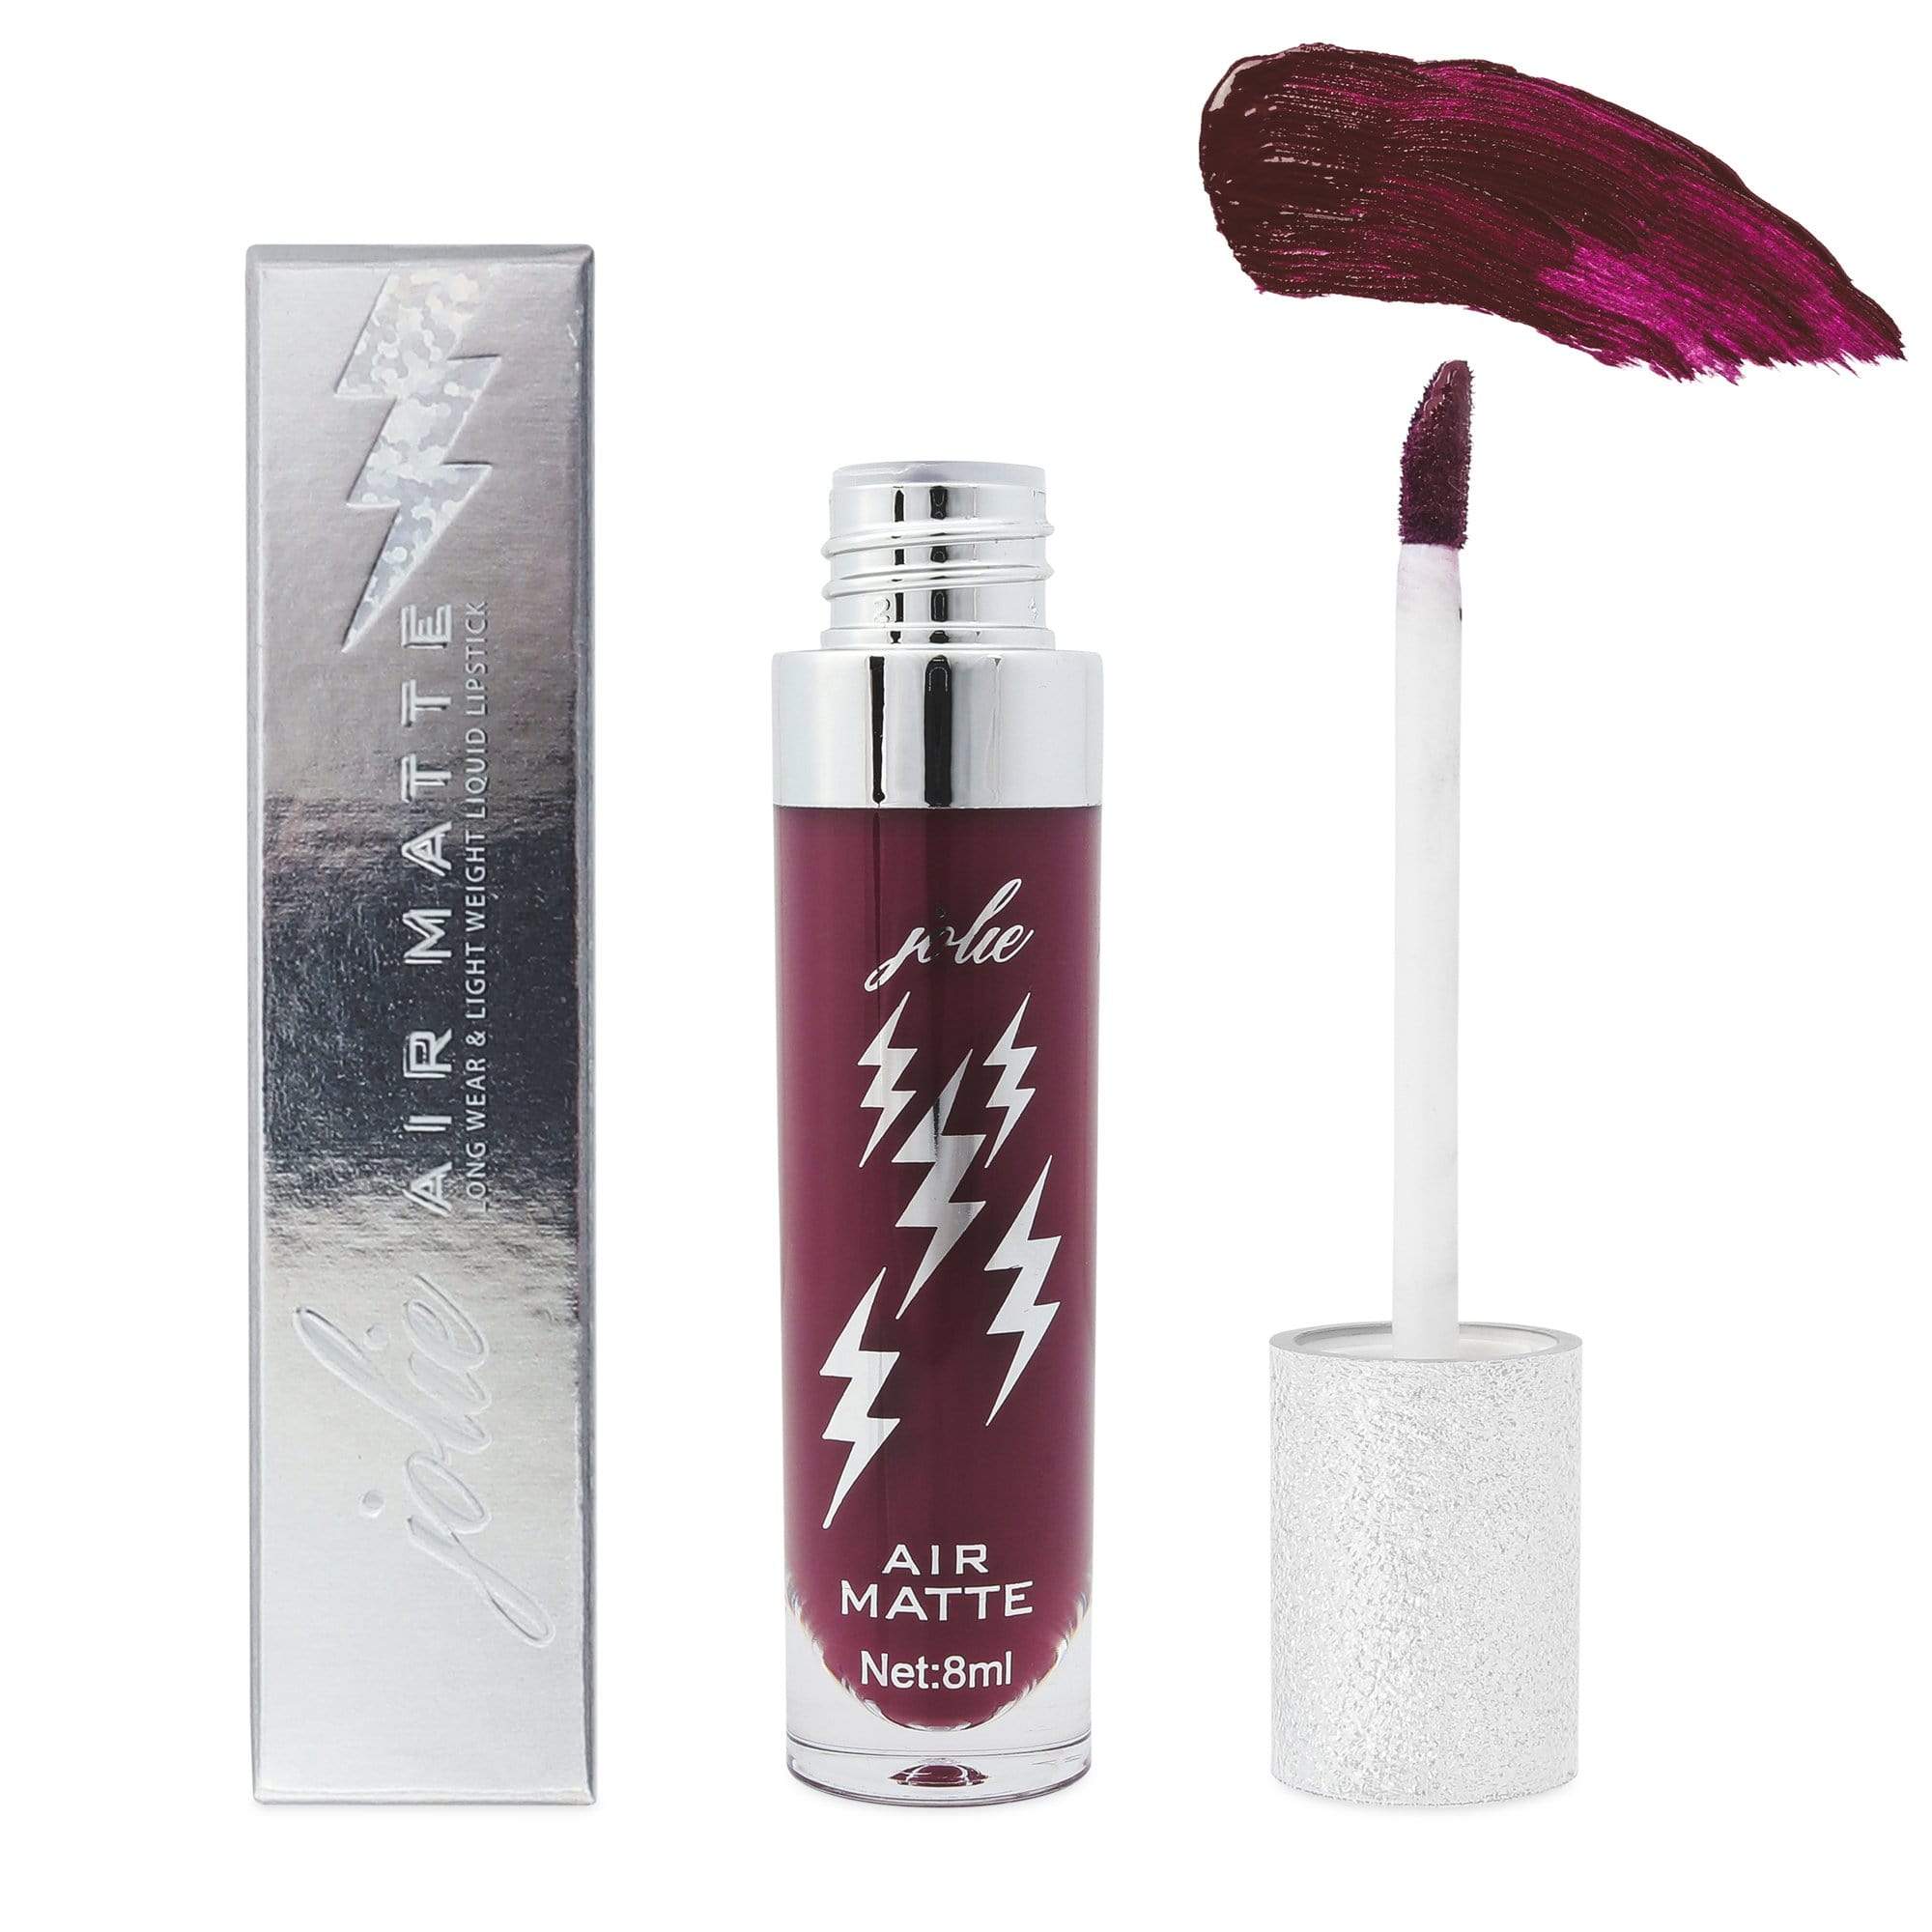 SpaceWitch - Gift Bundle - Jolie Beauty